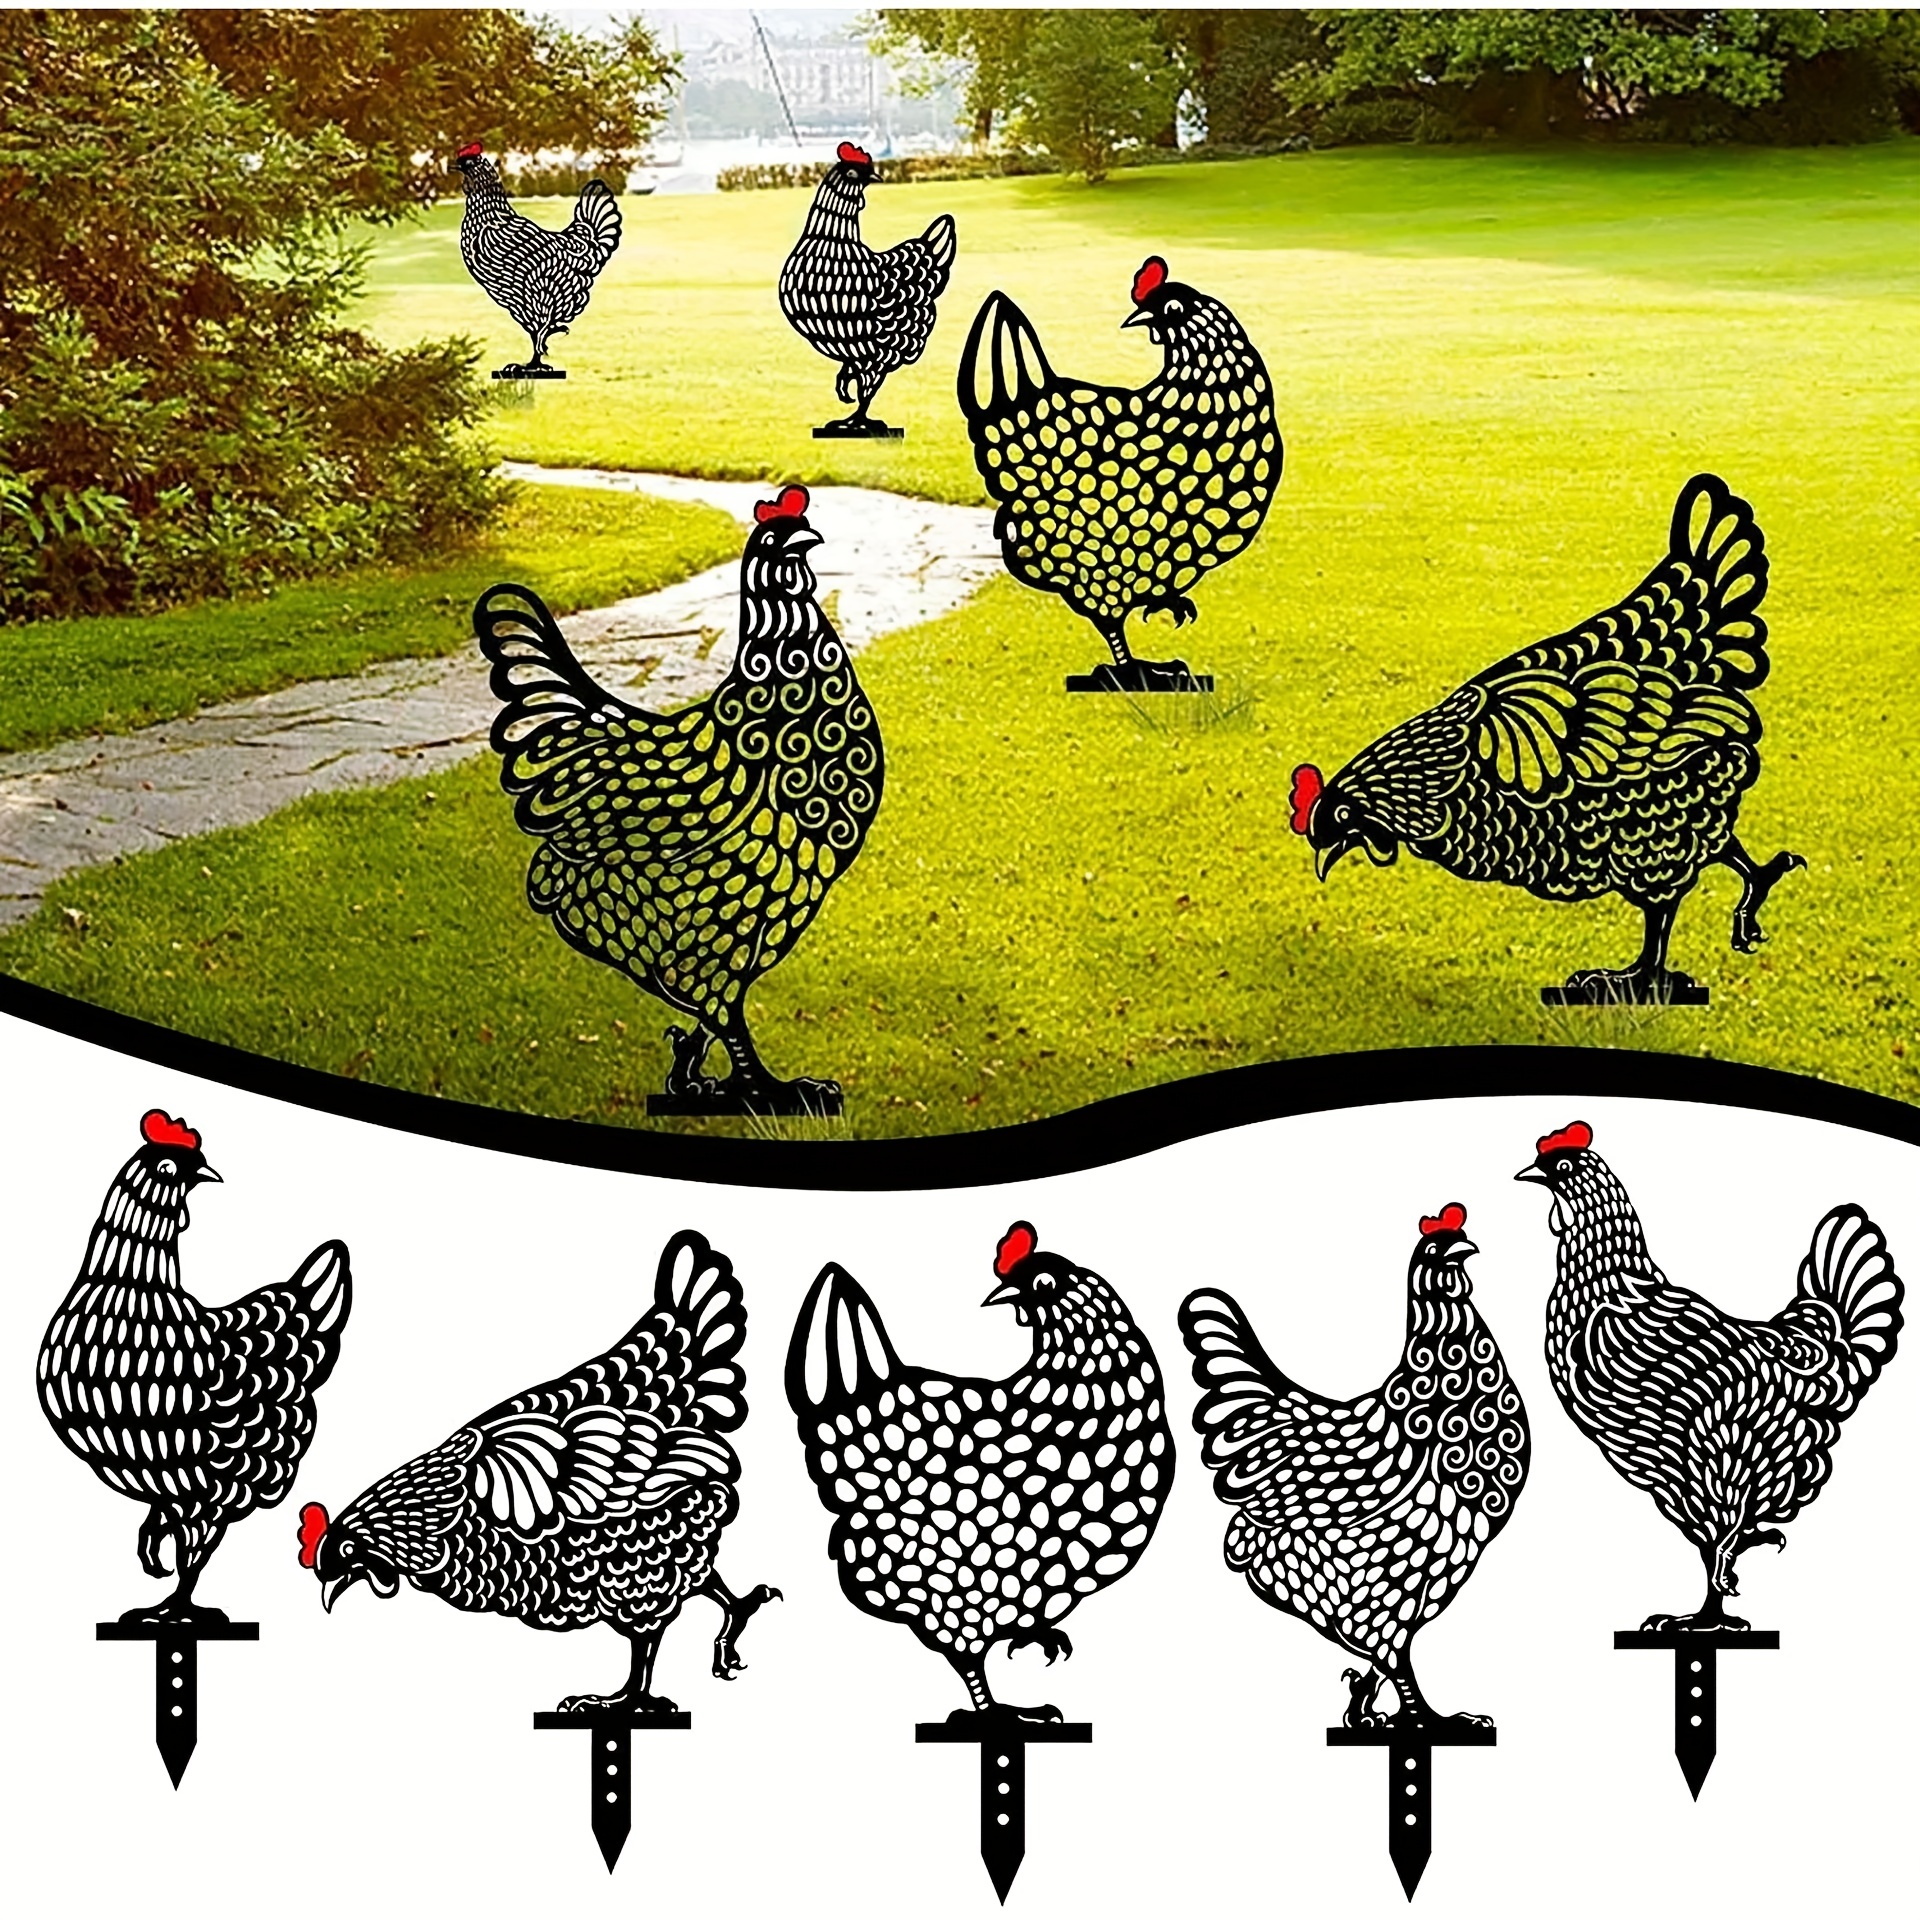 60 Black and White Rooster Decorative Yard Art